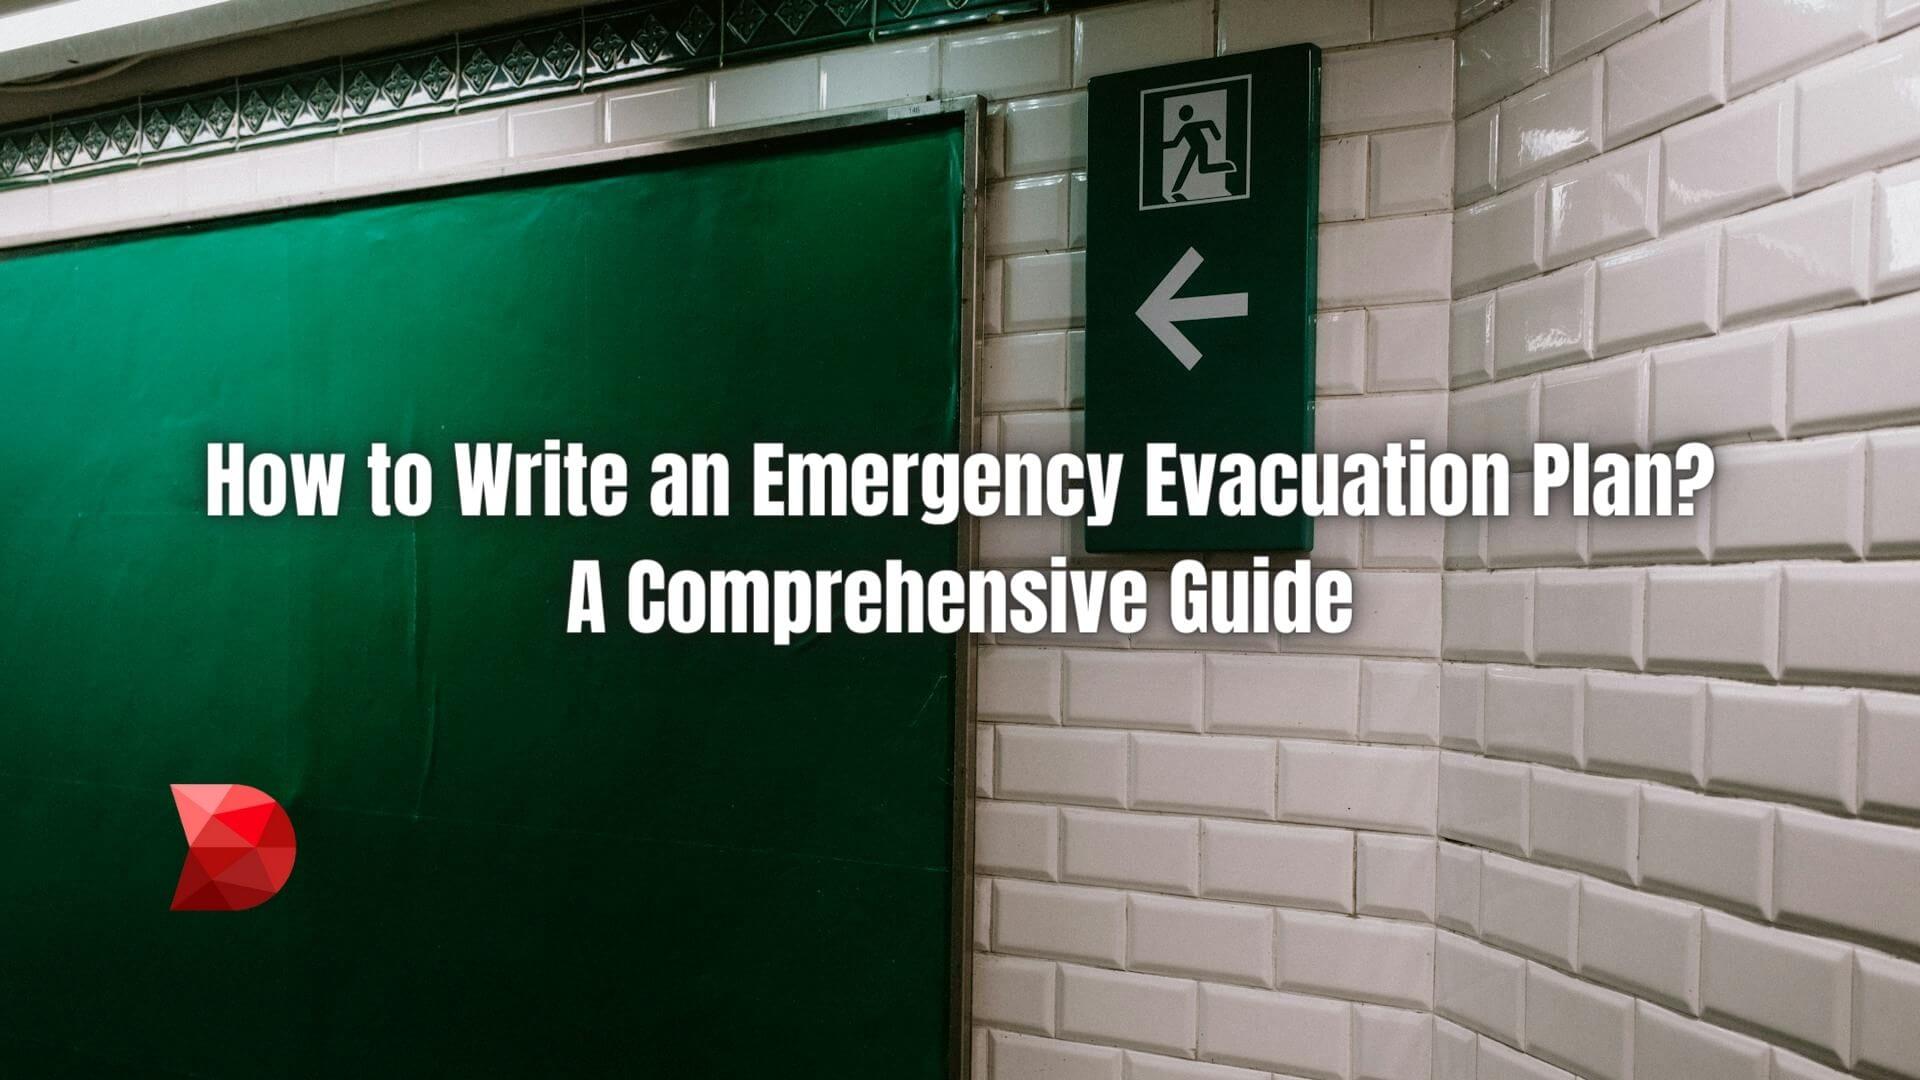 Craft a foolproof emergency evacuation plan with our complete guide. Learn essential steps and tips to ensure safety in crisis situations.